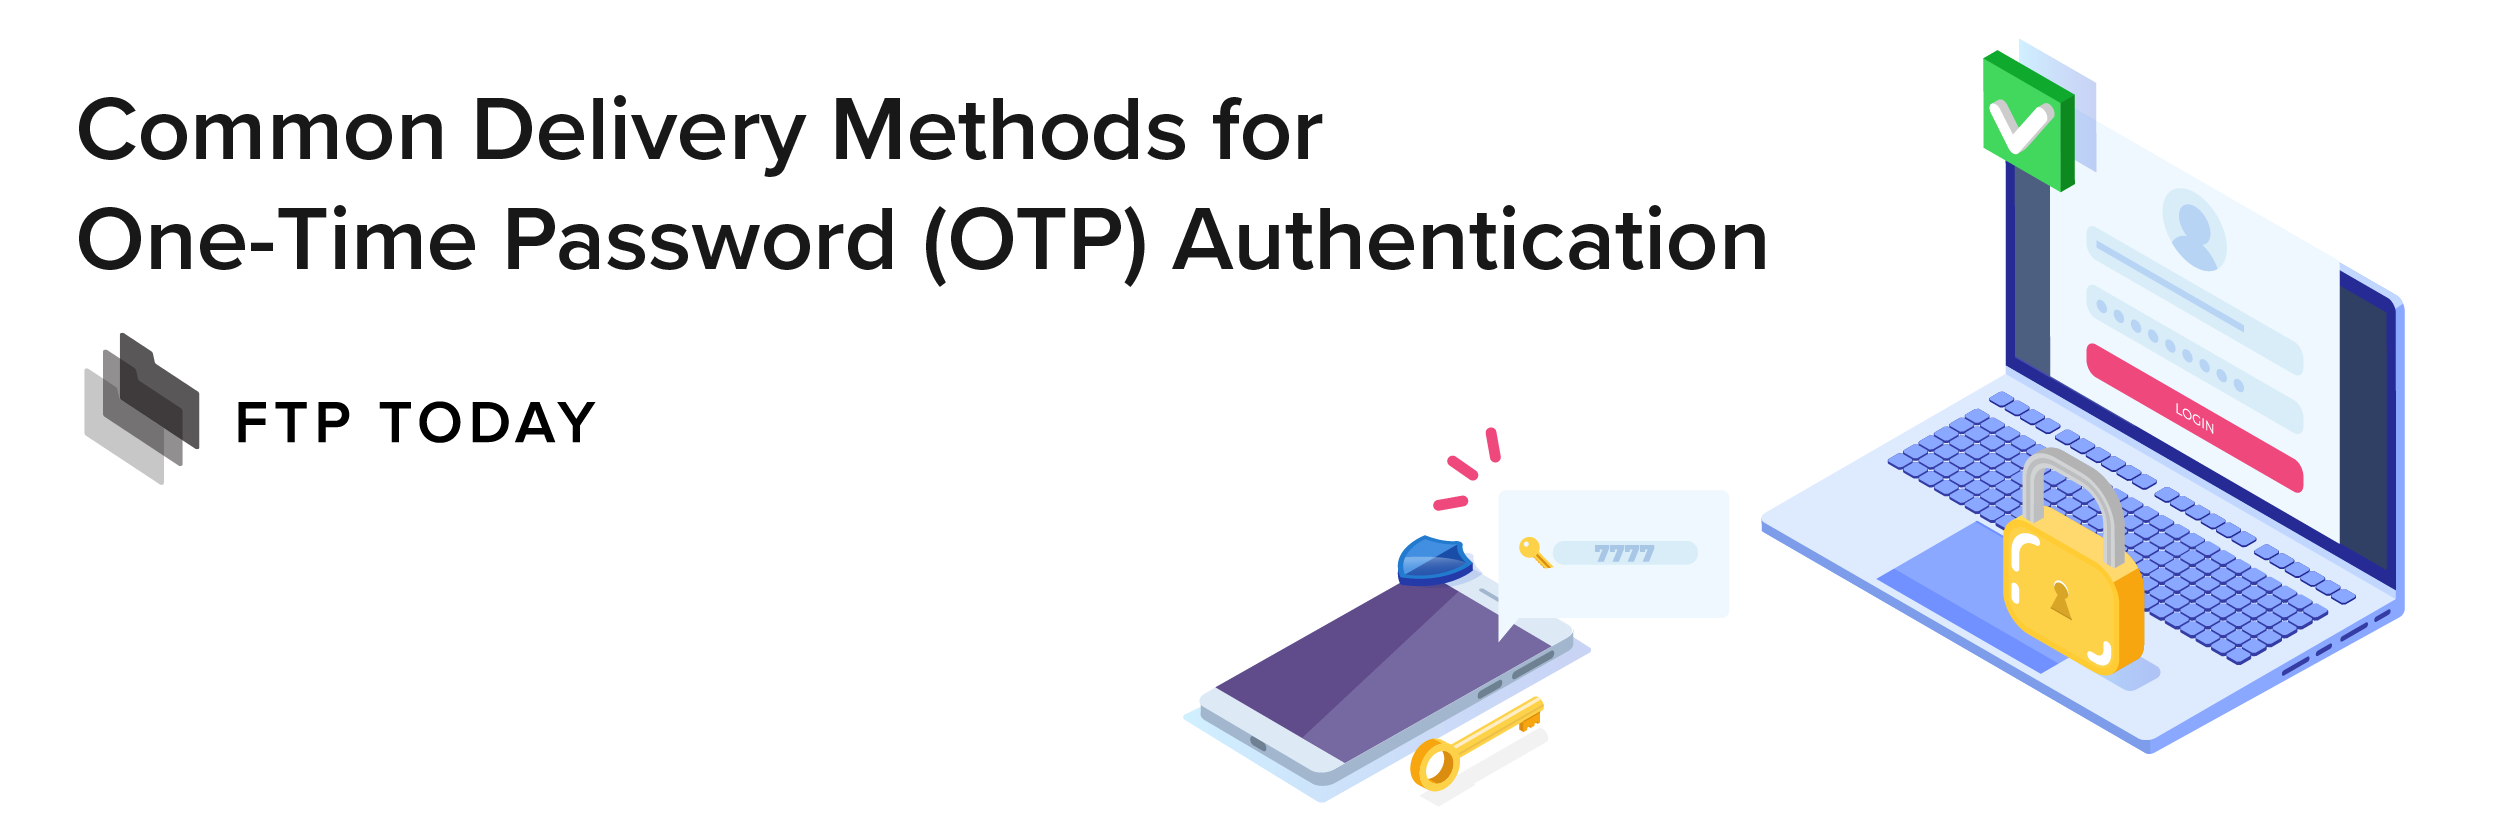 Common Delivery Methods for One-Time Password (OTP) Authentication